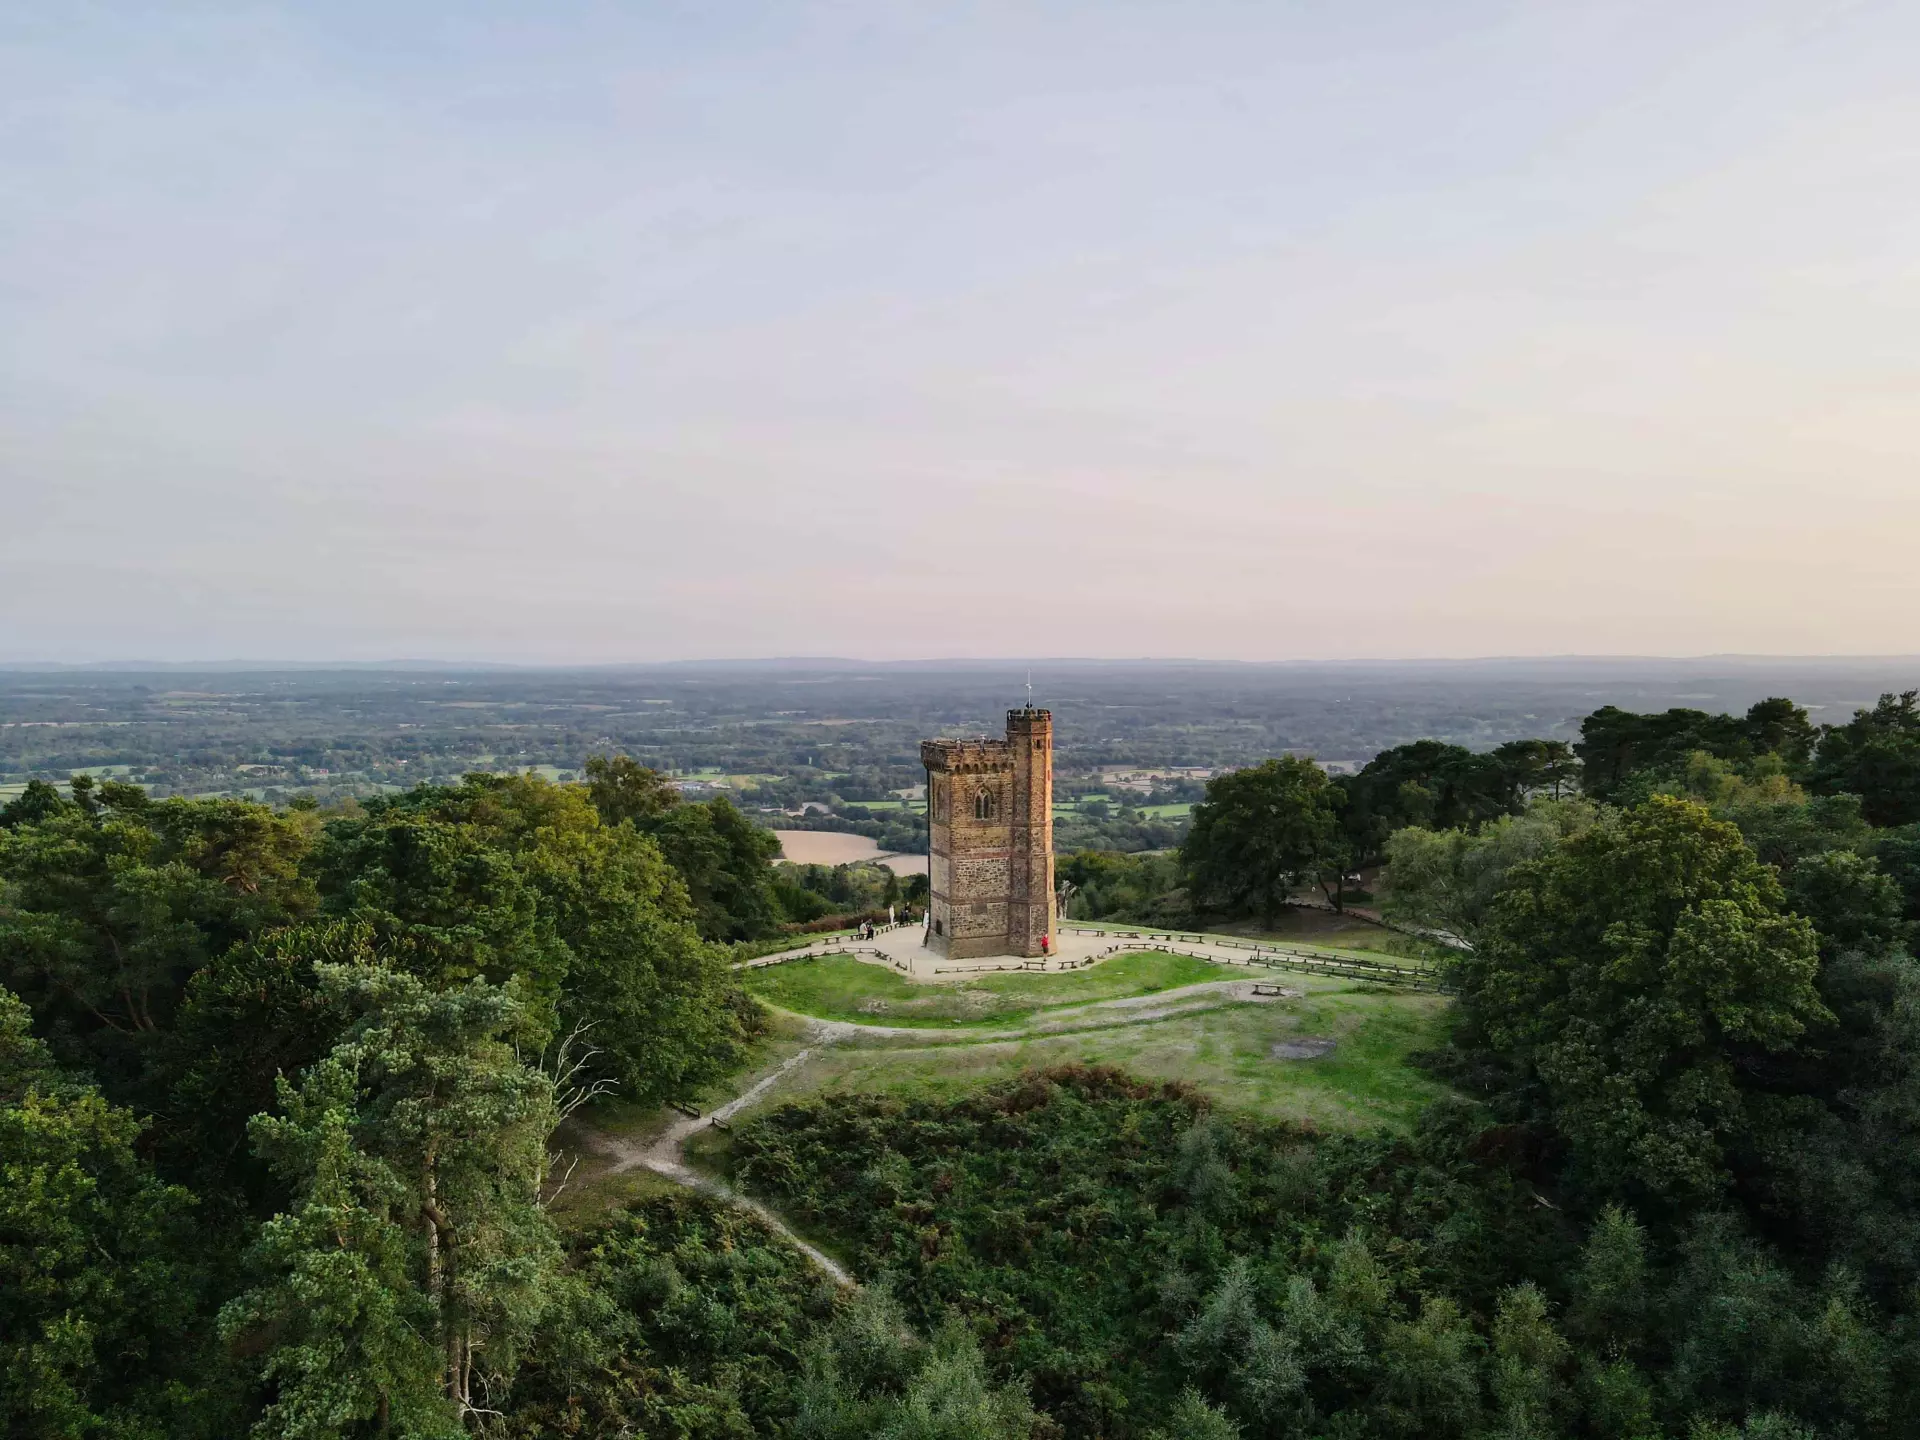 Leith Hill Tower with views overlooking the South of England